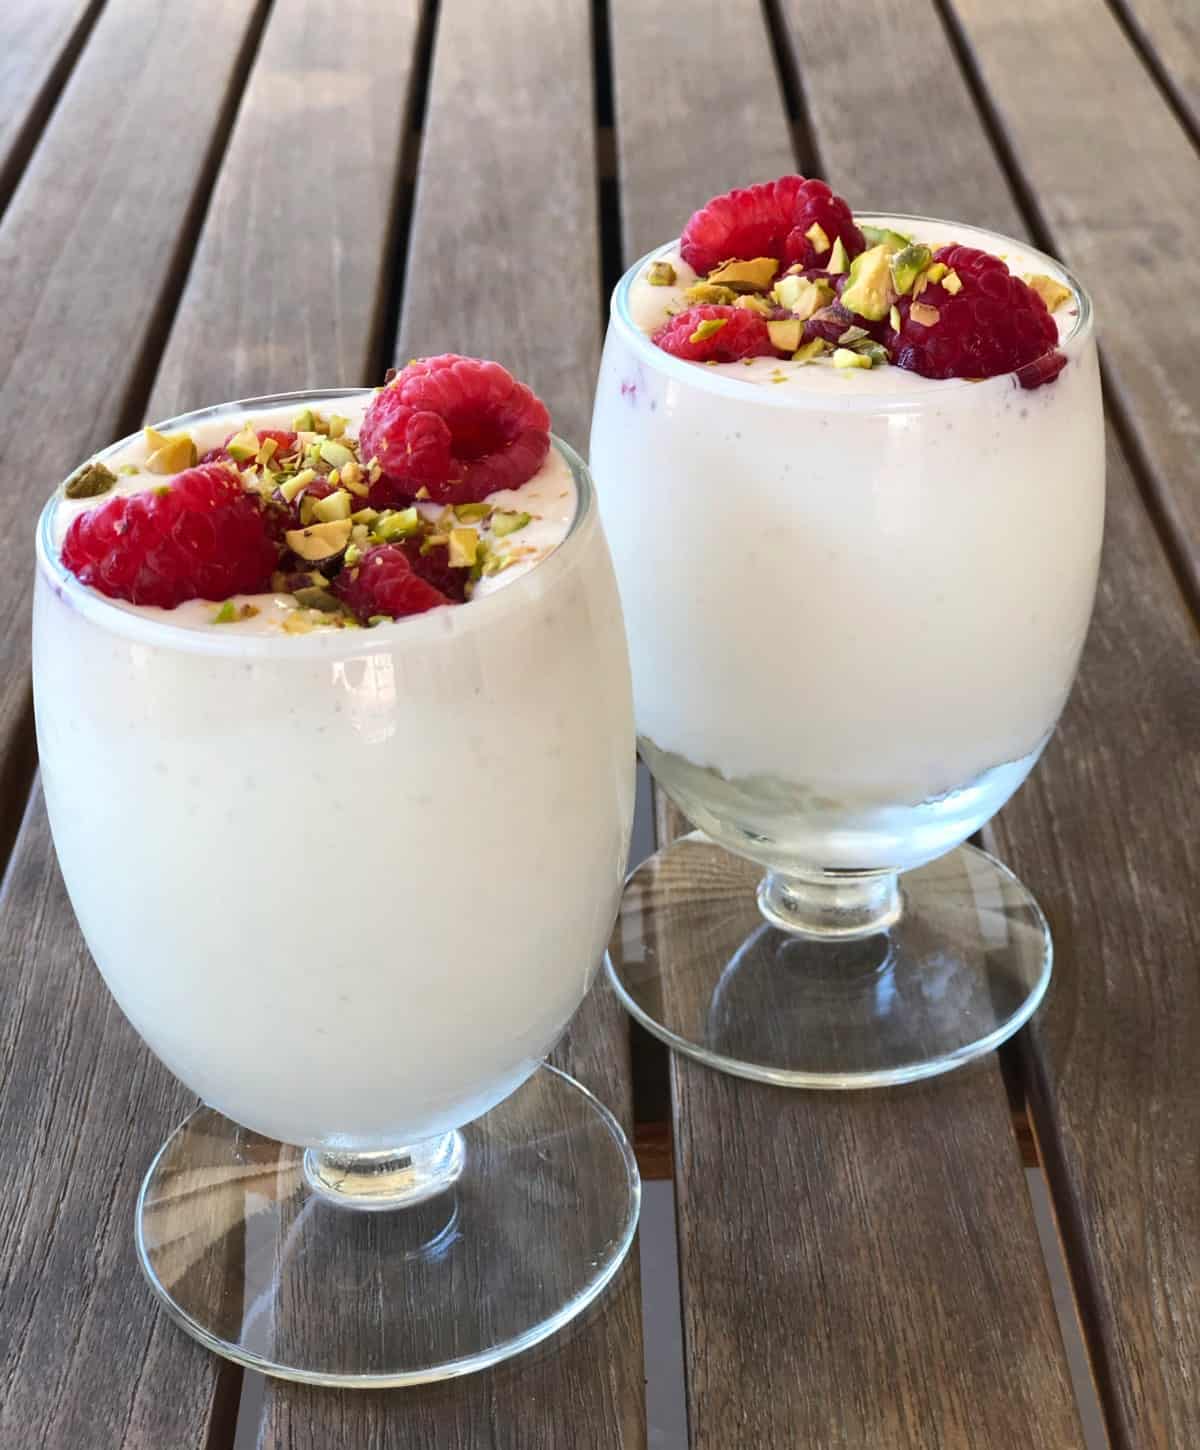 Two small glasses filled with cheesecake dessert and topped with fresh raspberries and chopped pistachios.